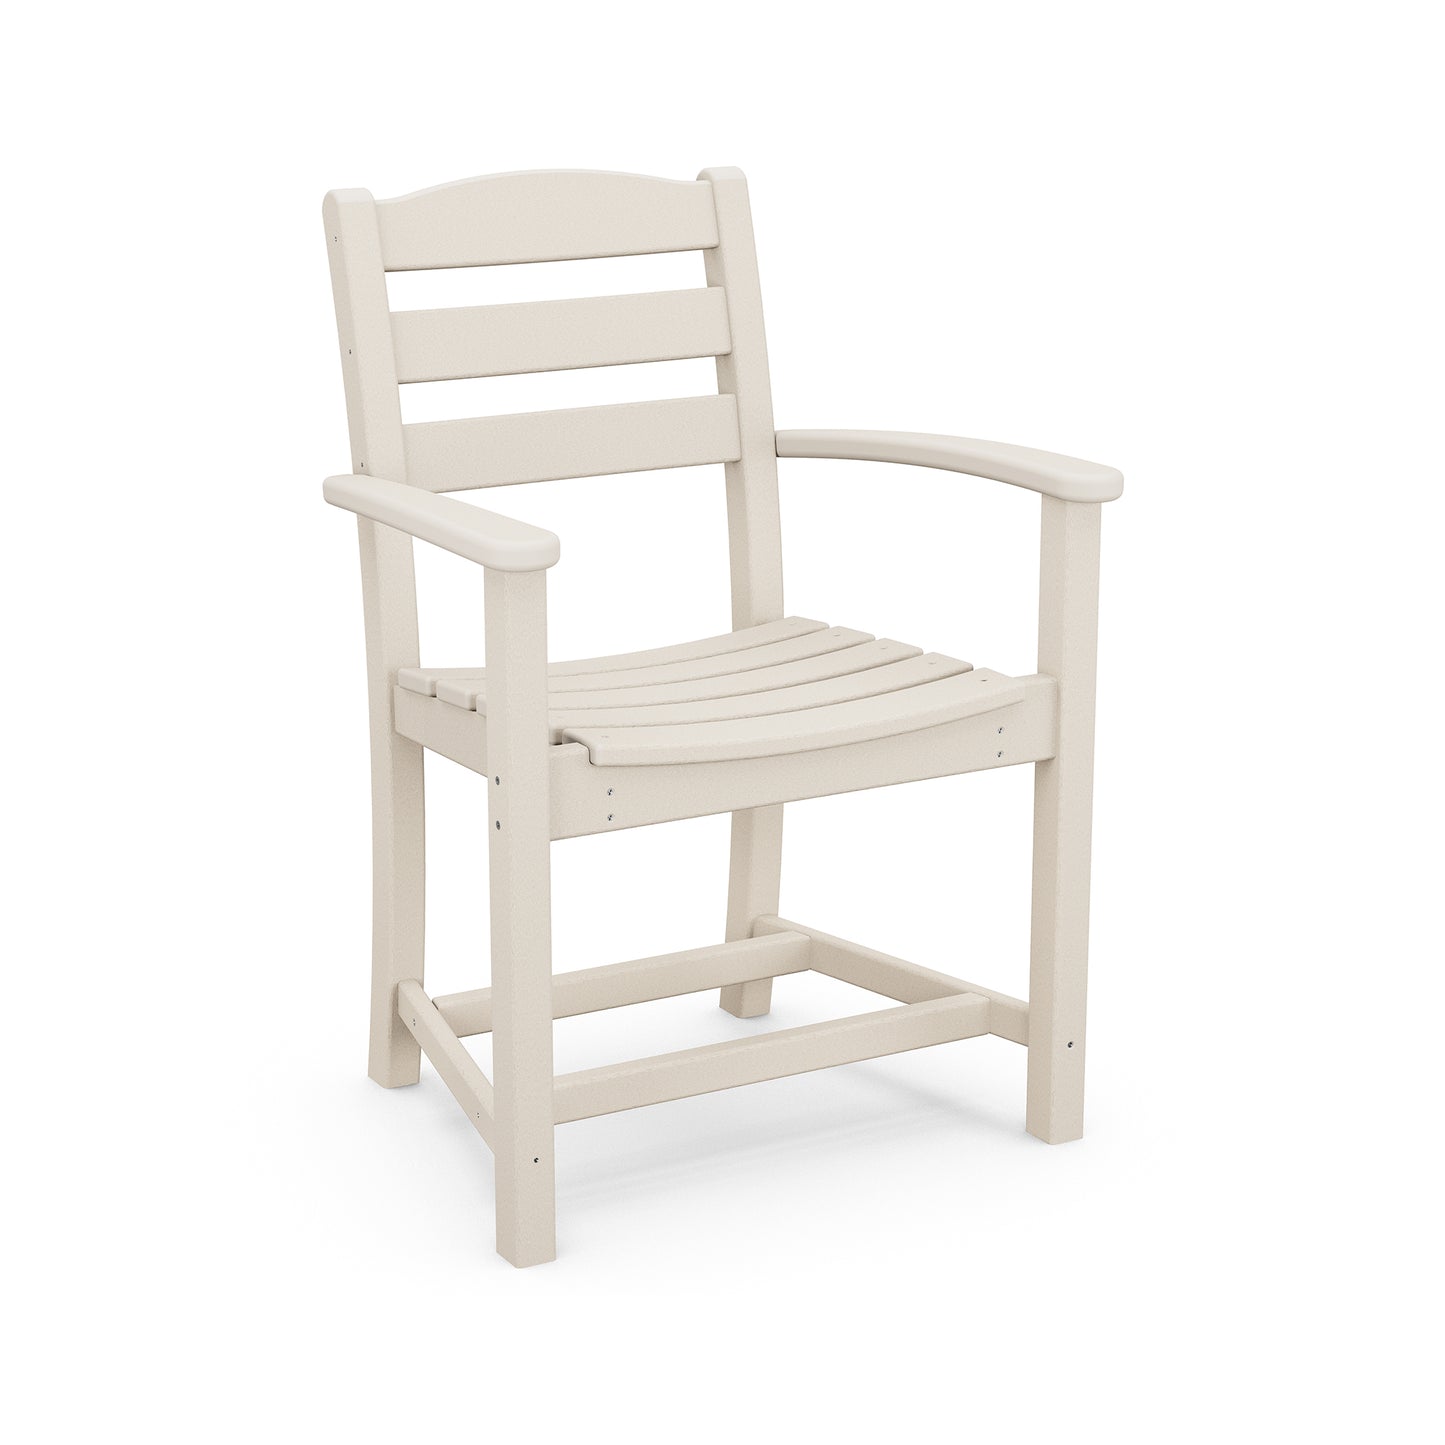 A beige POLYWOOD® La Casa Cafe outdoor armchair with a slatted back and seat design, crafted from durable plastic. The chair has sturdy armrests and stands isolated on a plain white background.